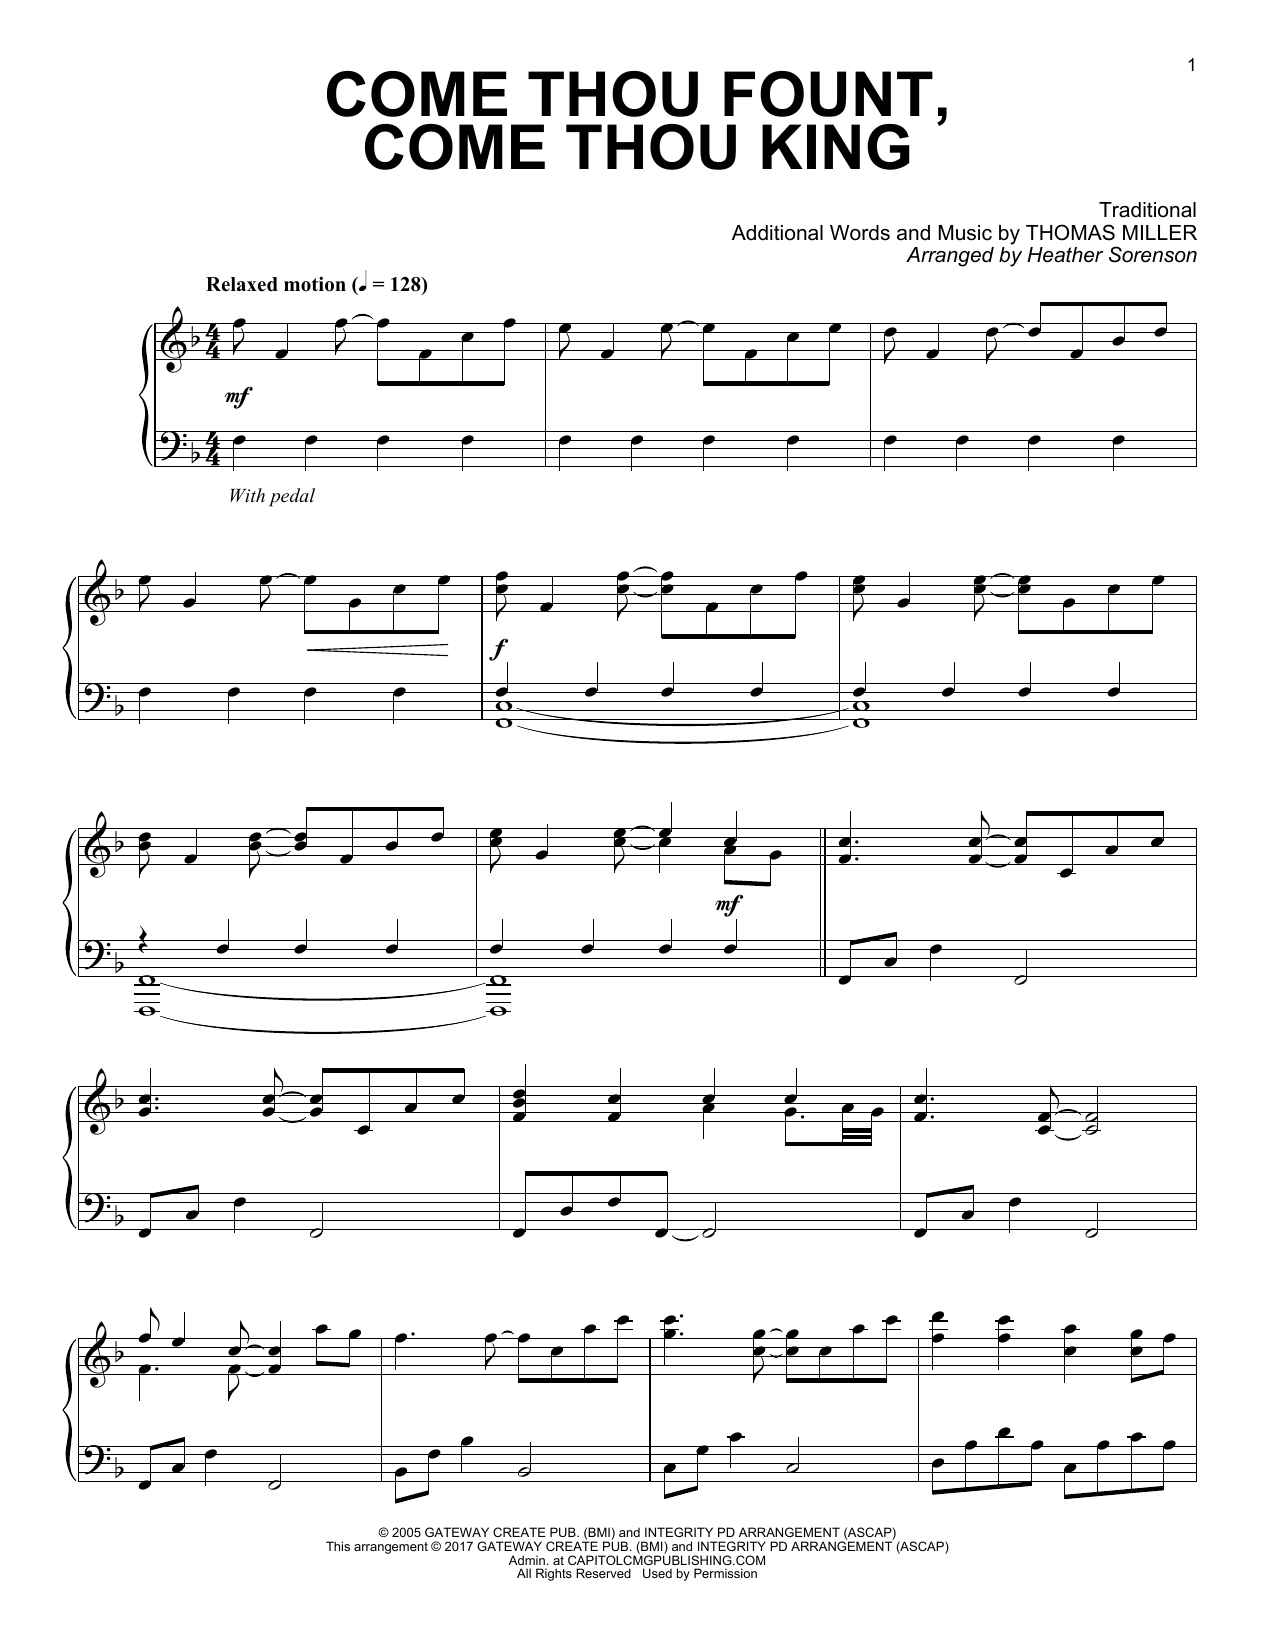 Download Thomas Miller Come Thou Fount, Come Thou King Sheet Music